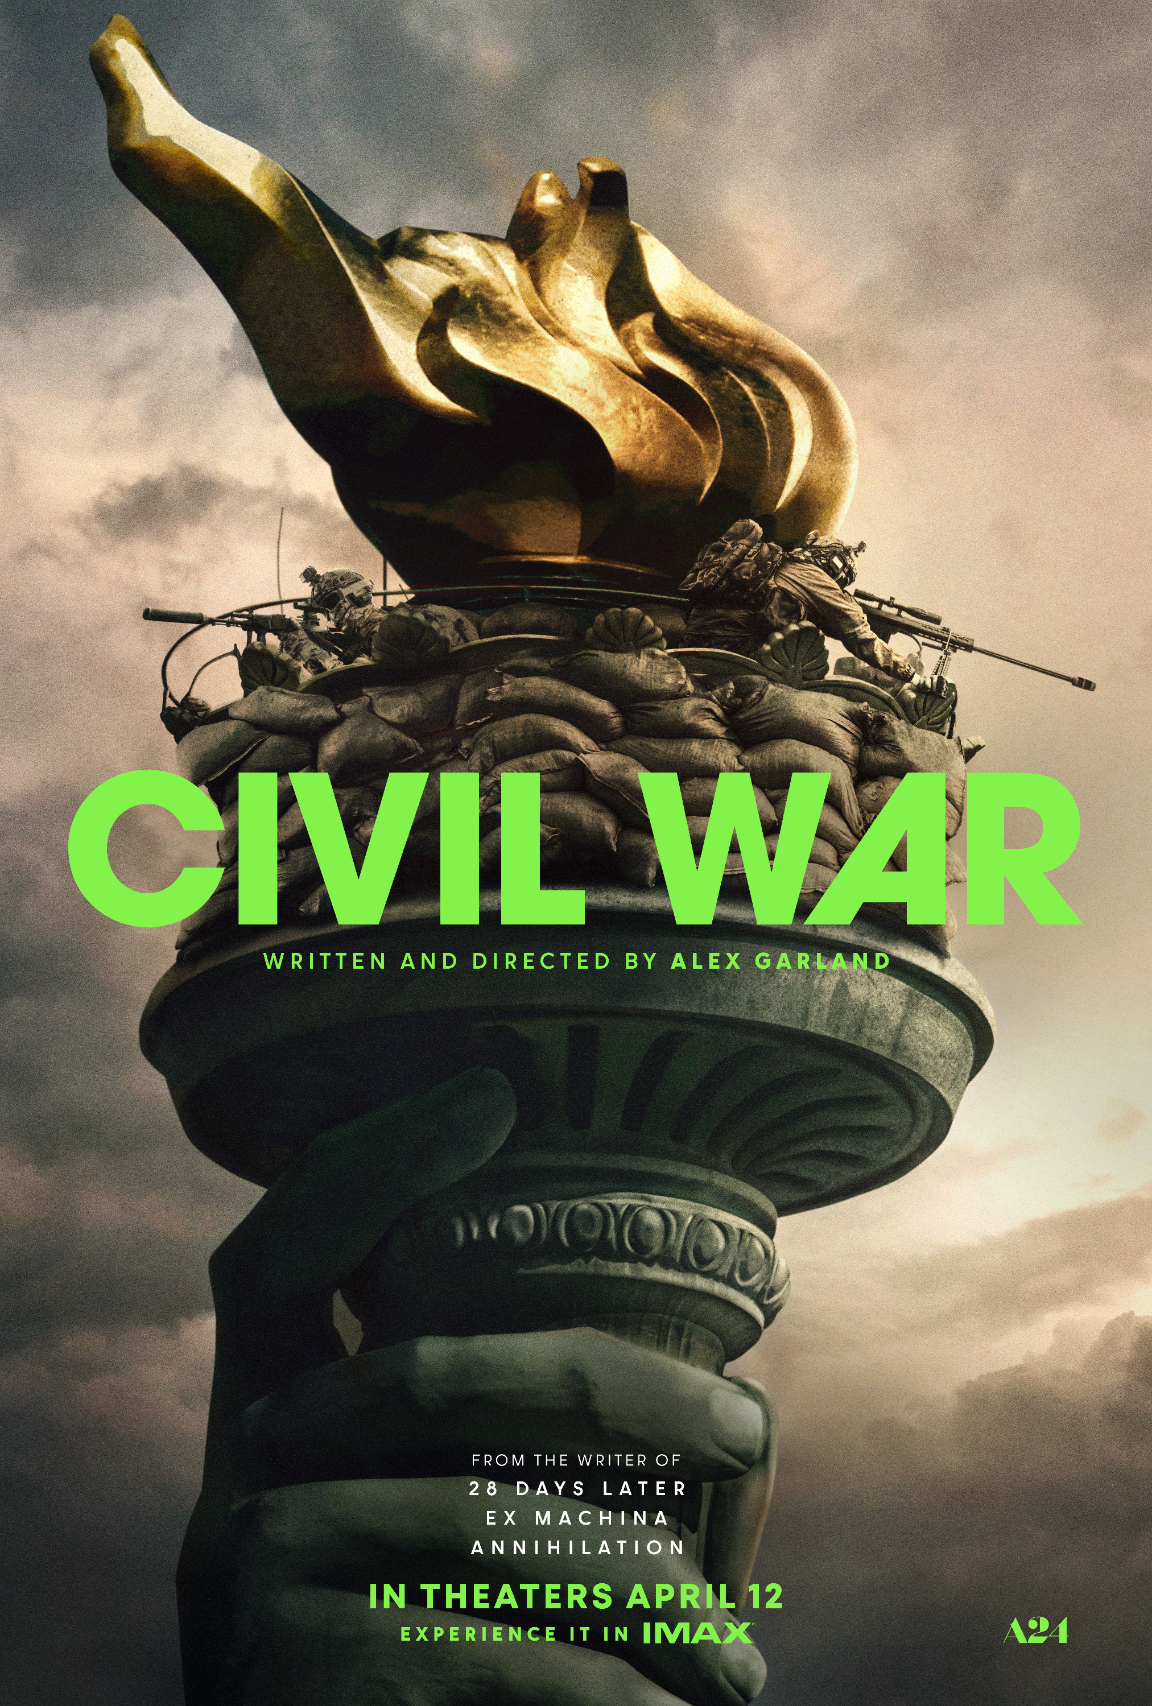 Movie poster for &quot;Civil War,&quot; depicting a statue with snakes, written/directed by Alex Garland, IMAX release soon